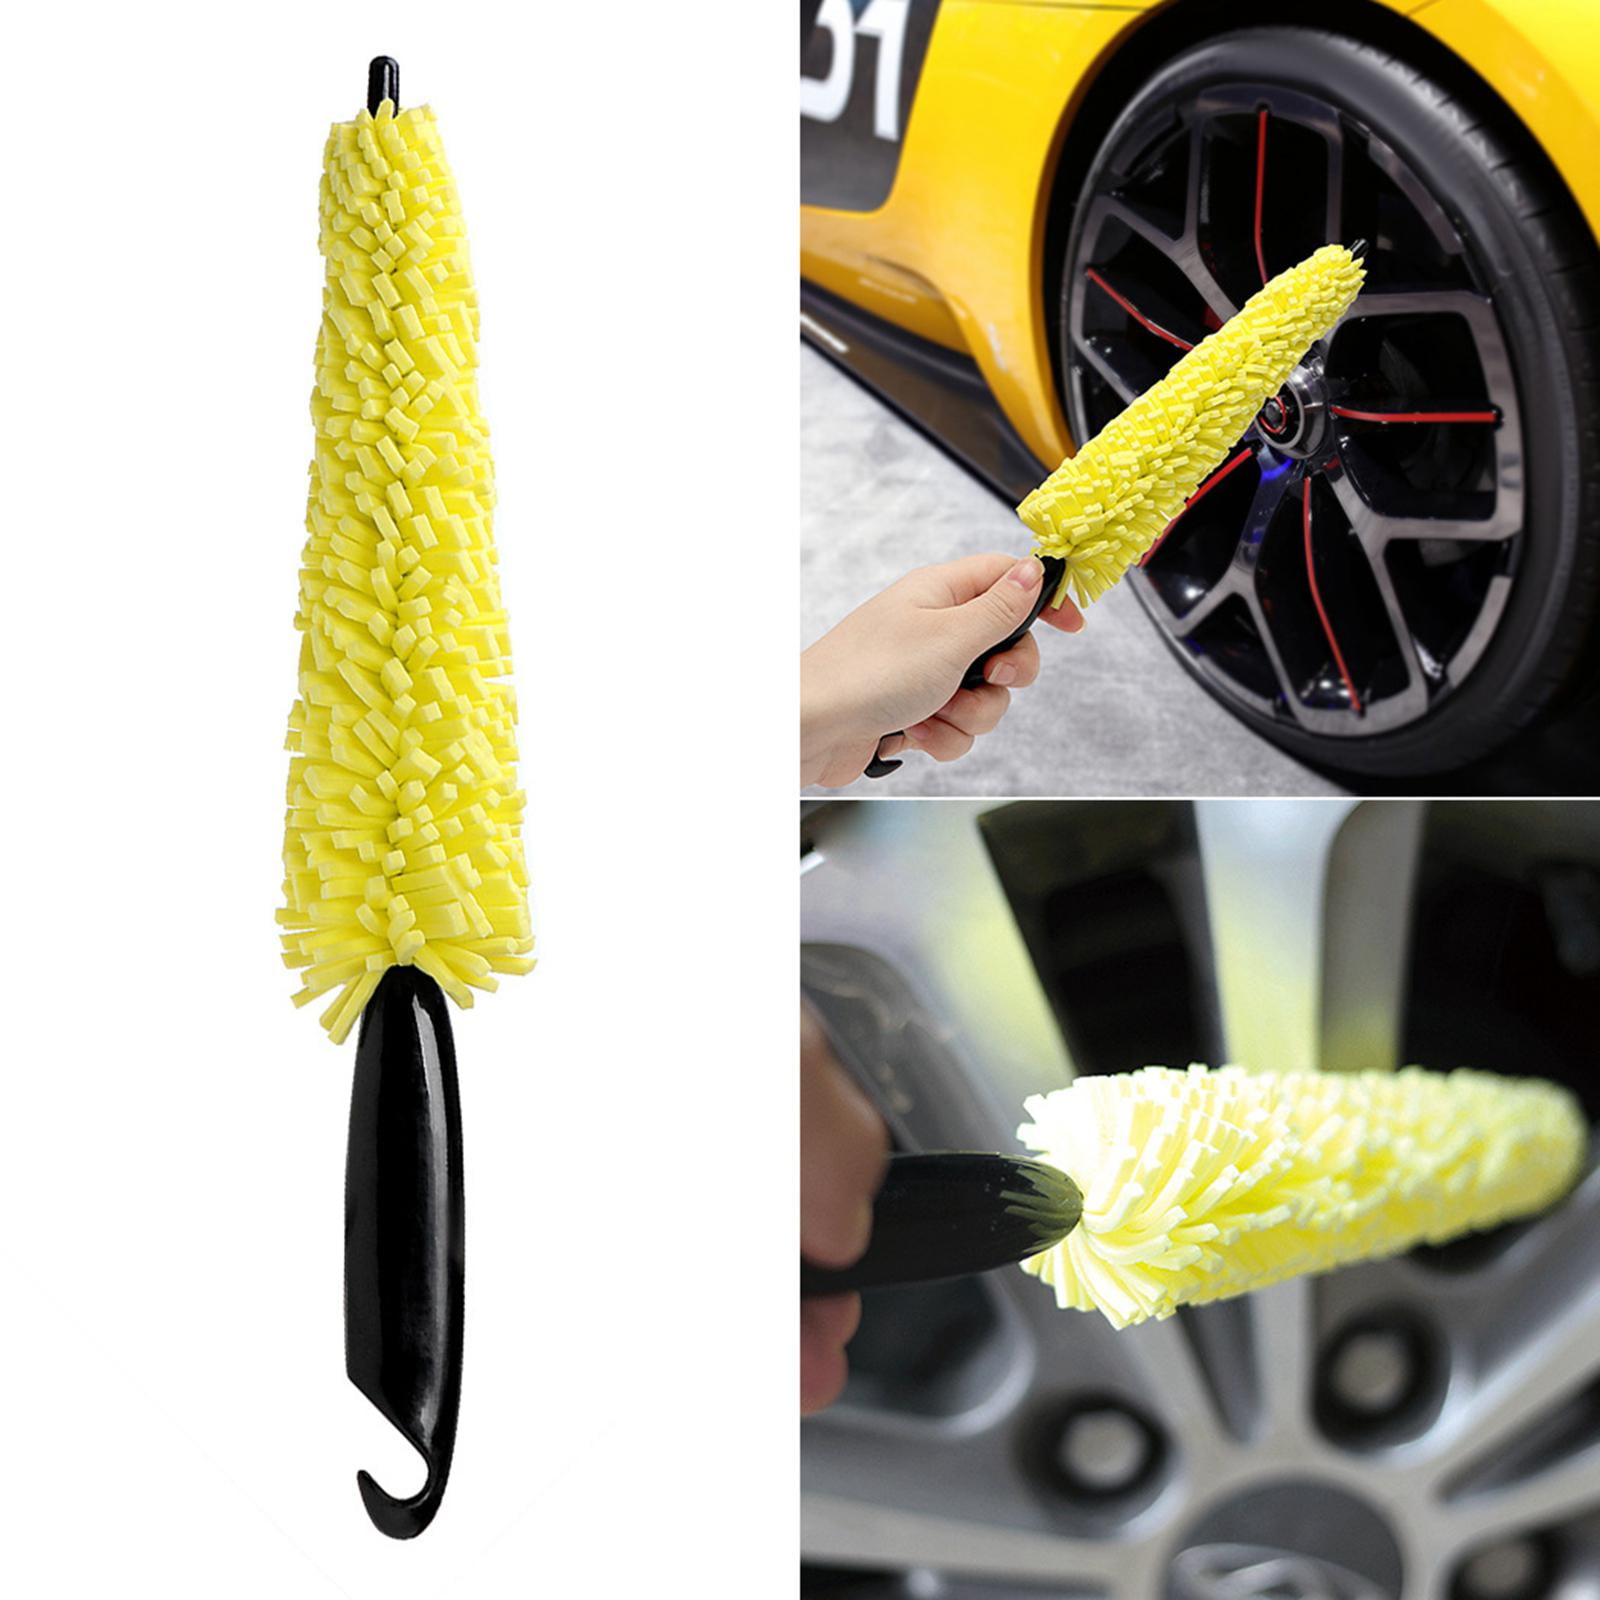 Atopoler Car Wheels Cleaning Brush Soft Bristle & No Scratches Car Rim Brush Detailing Brushes Reaching Deep Cleaner Tool for Car Vehicle Motorcycle